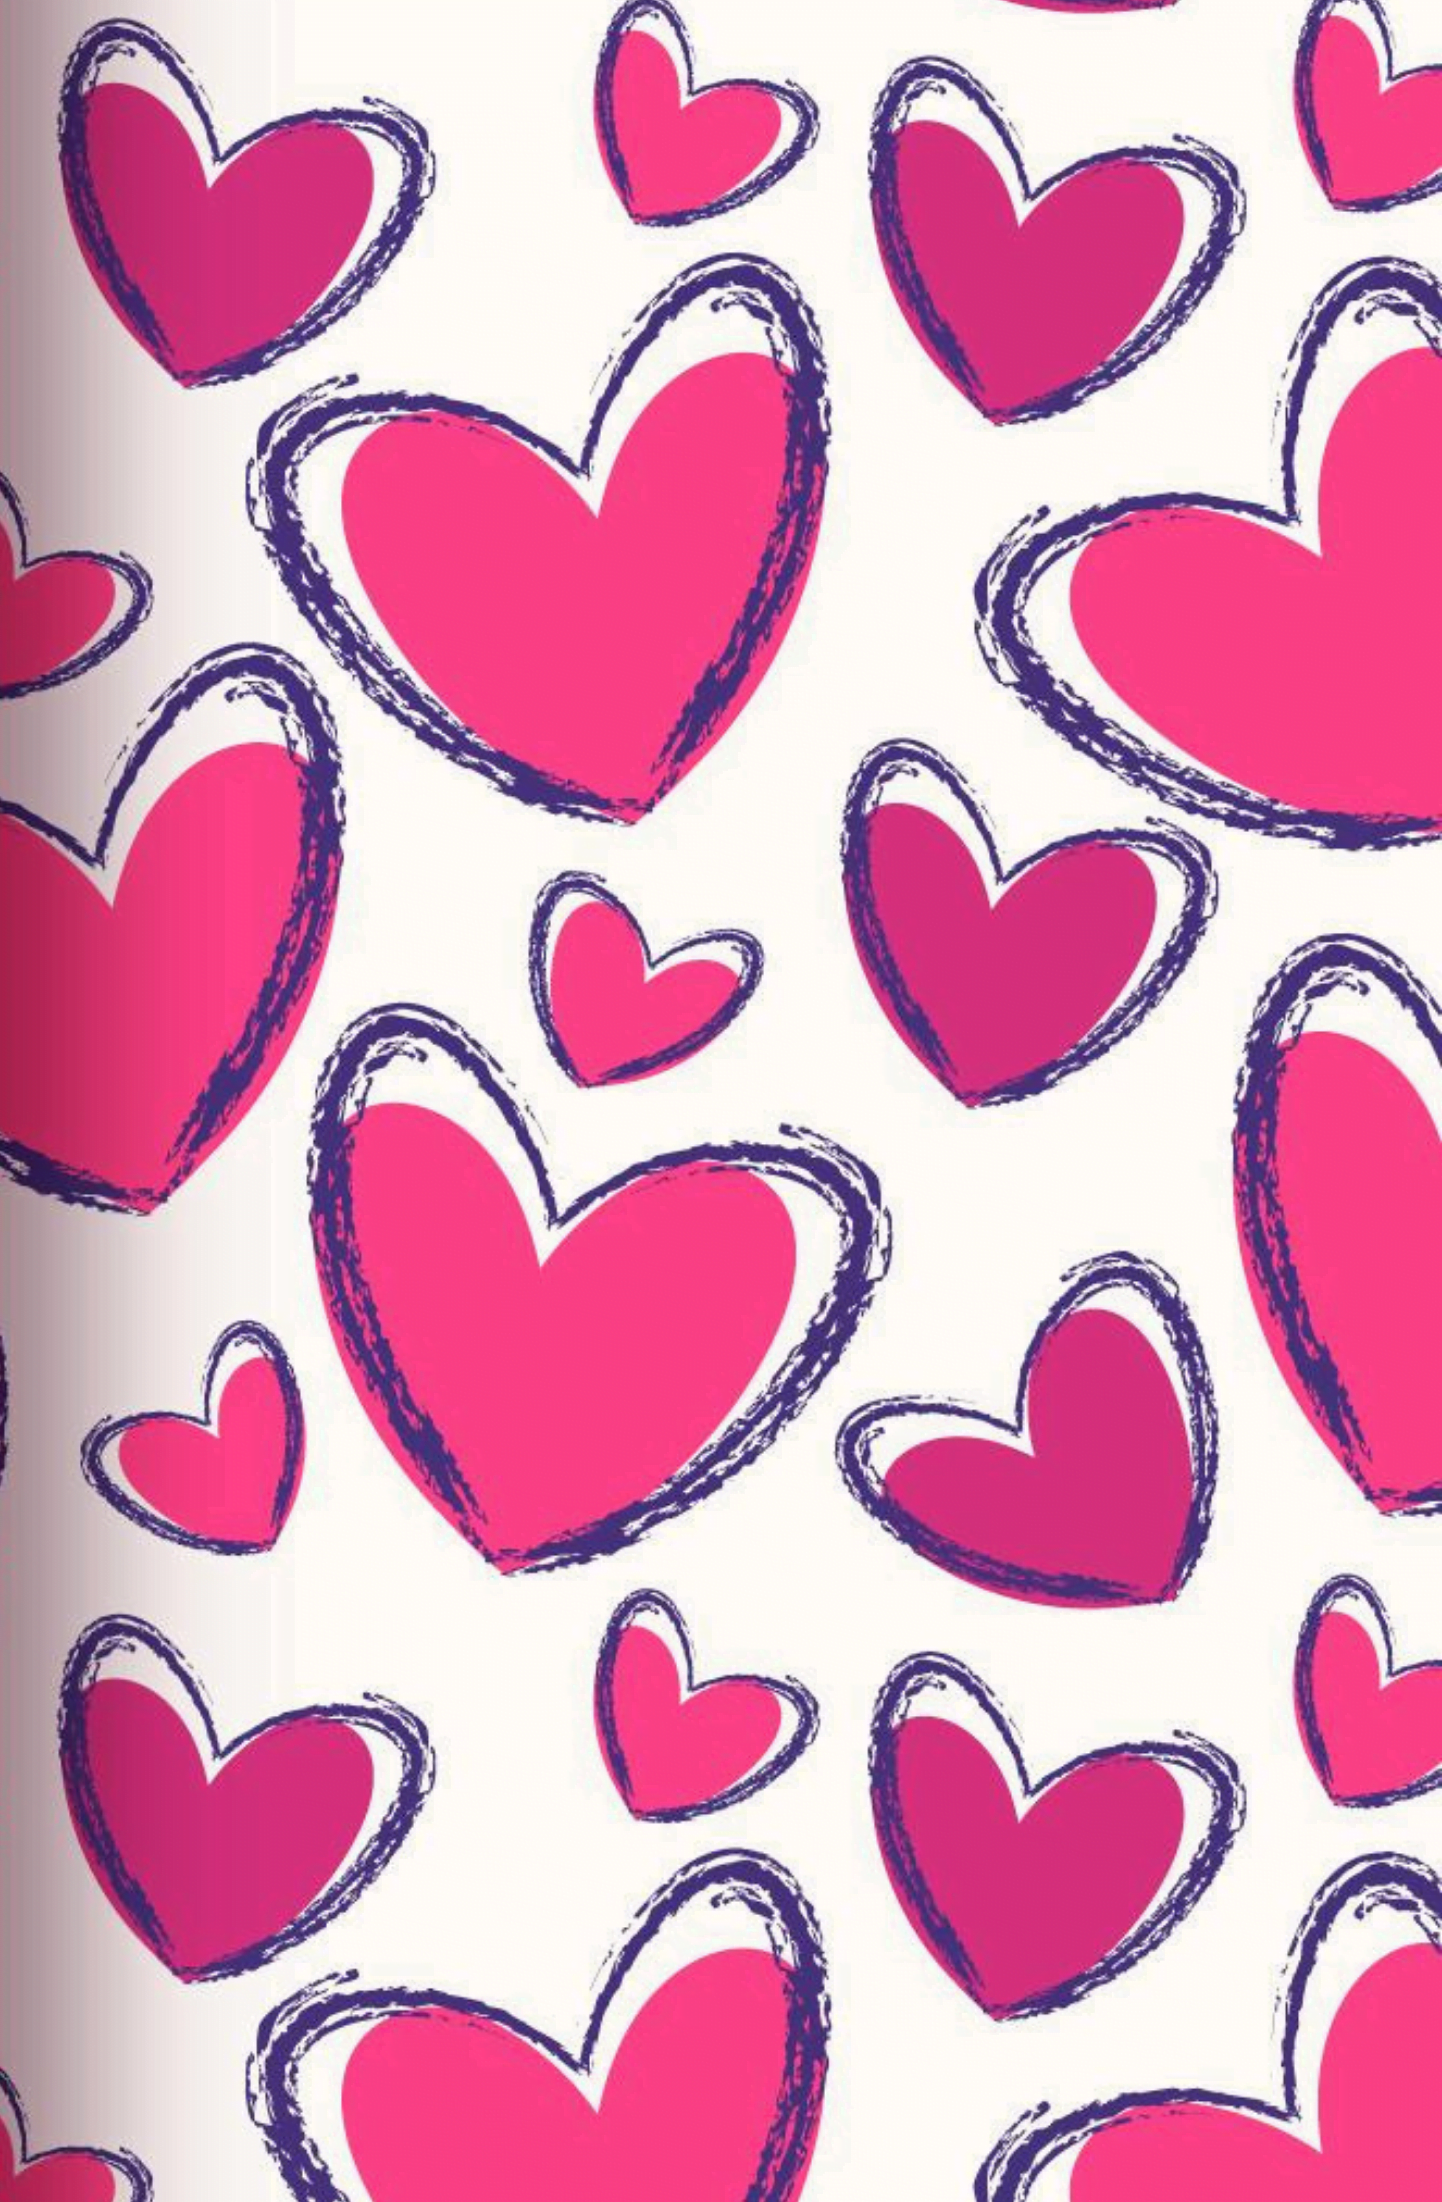 Valentine's Day wallpaper for phone 2021